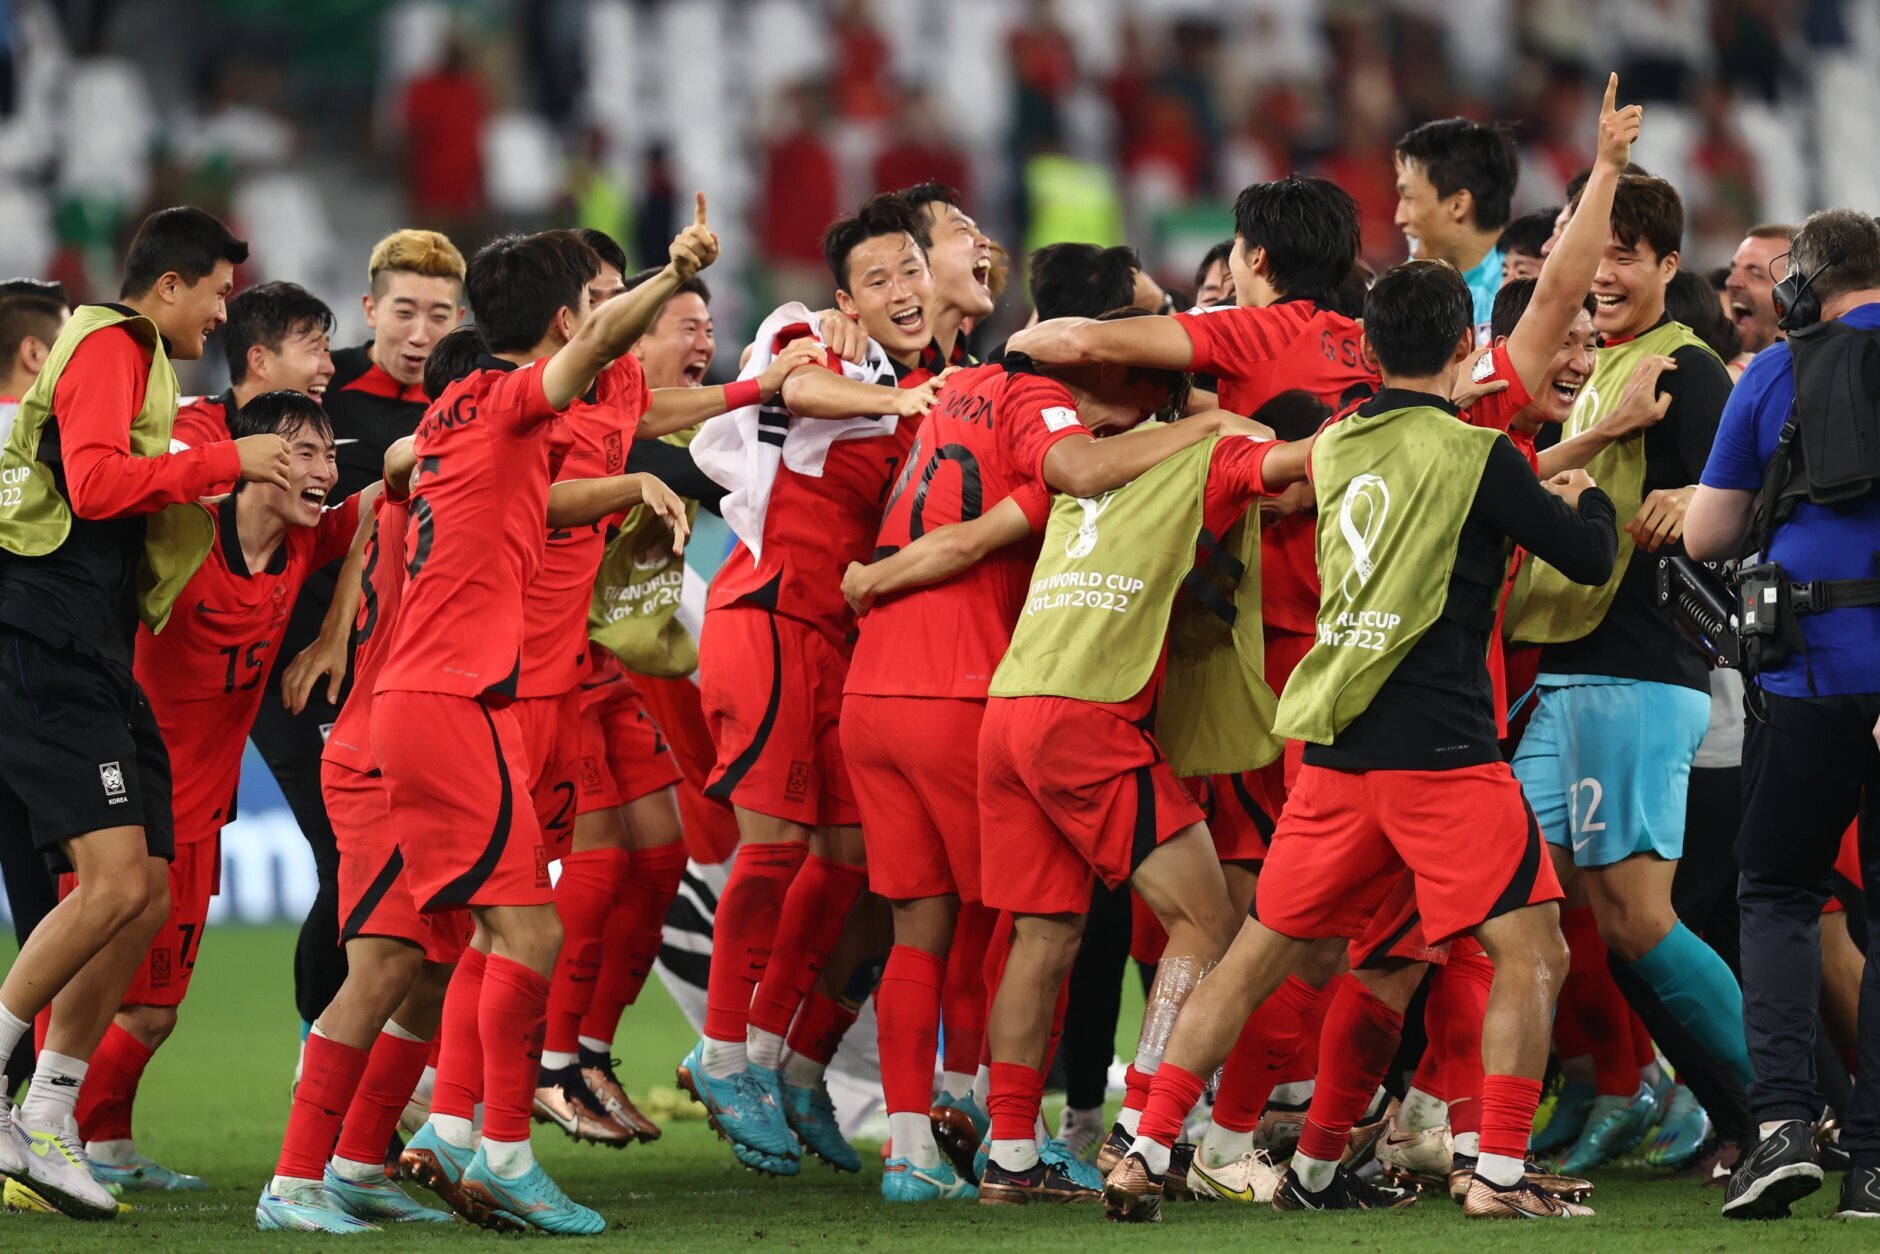 &lt;p&gt;AL RAYYAN, QATAR &#8211; DECEMBER 02: Players of Korea Republic celebrate at full time as they qualify for the knock out rounds during the FIFA World Cup Qatar 2022 Group H match between Korea Republic and Portugal at Education City Stadium on December 2, 2022 in Al Rayyan, Qatar. (Photo by James Williamson &#8211; AMA/Getty Images)&lt;/p&gt;
